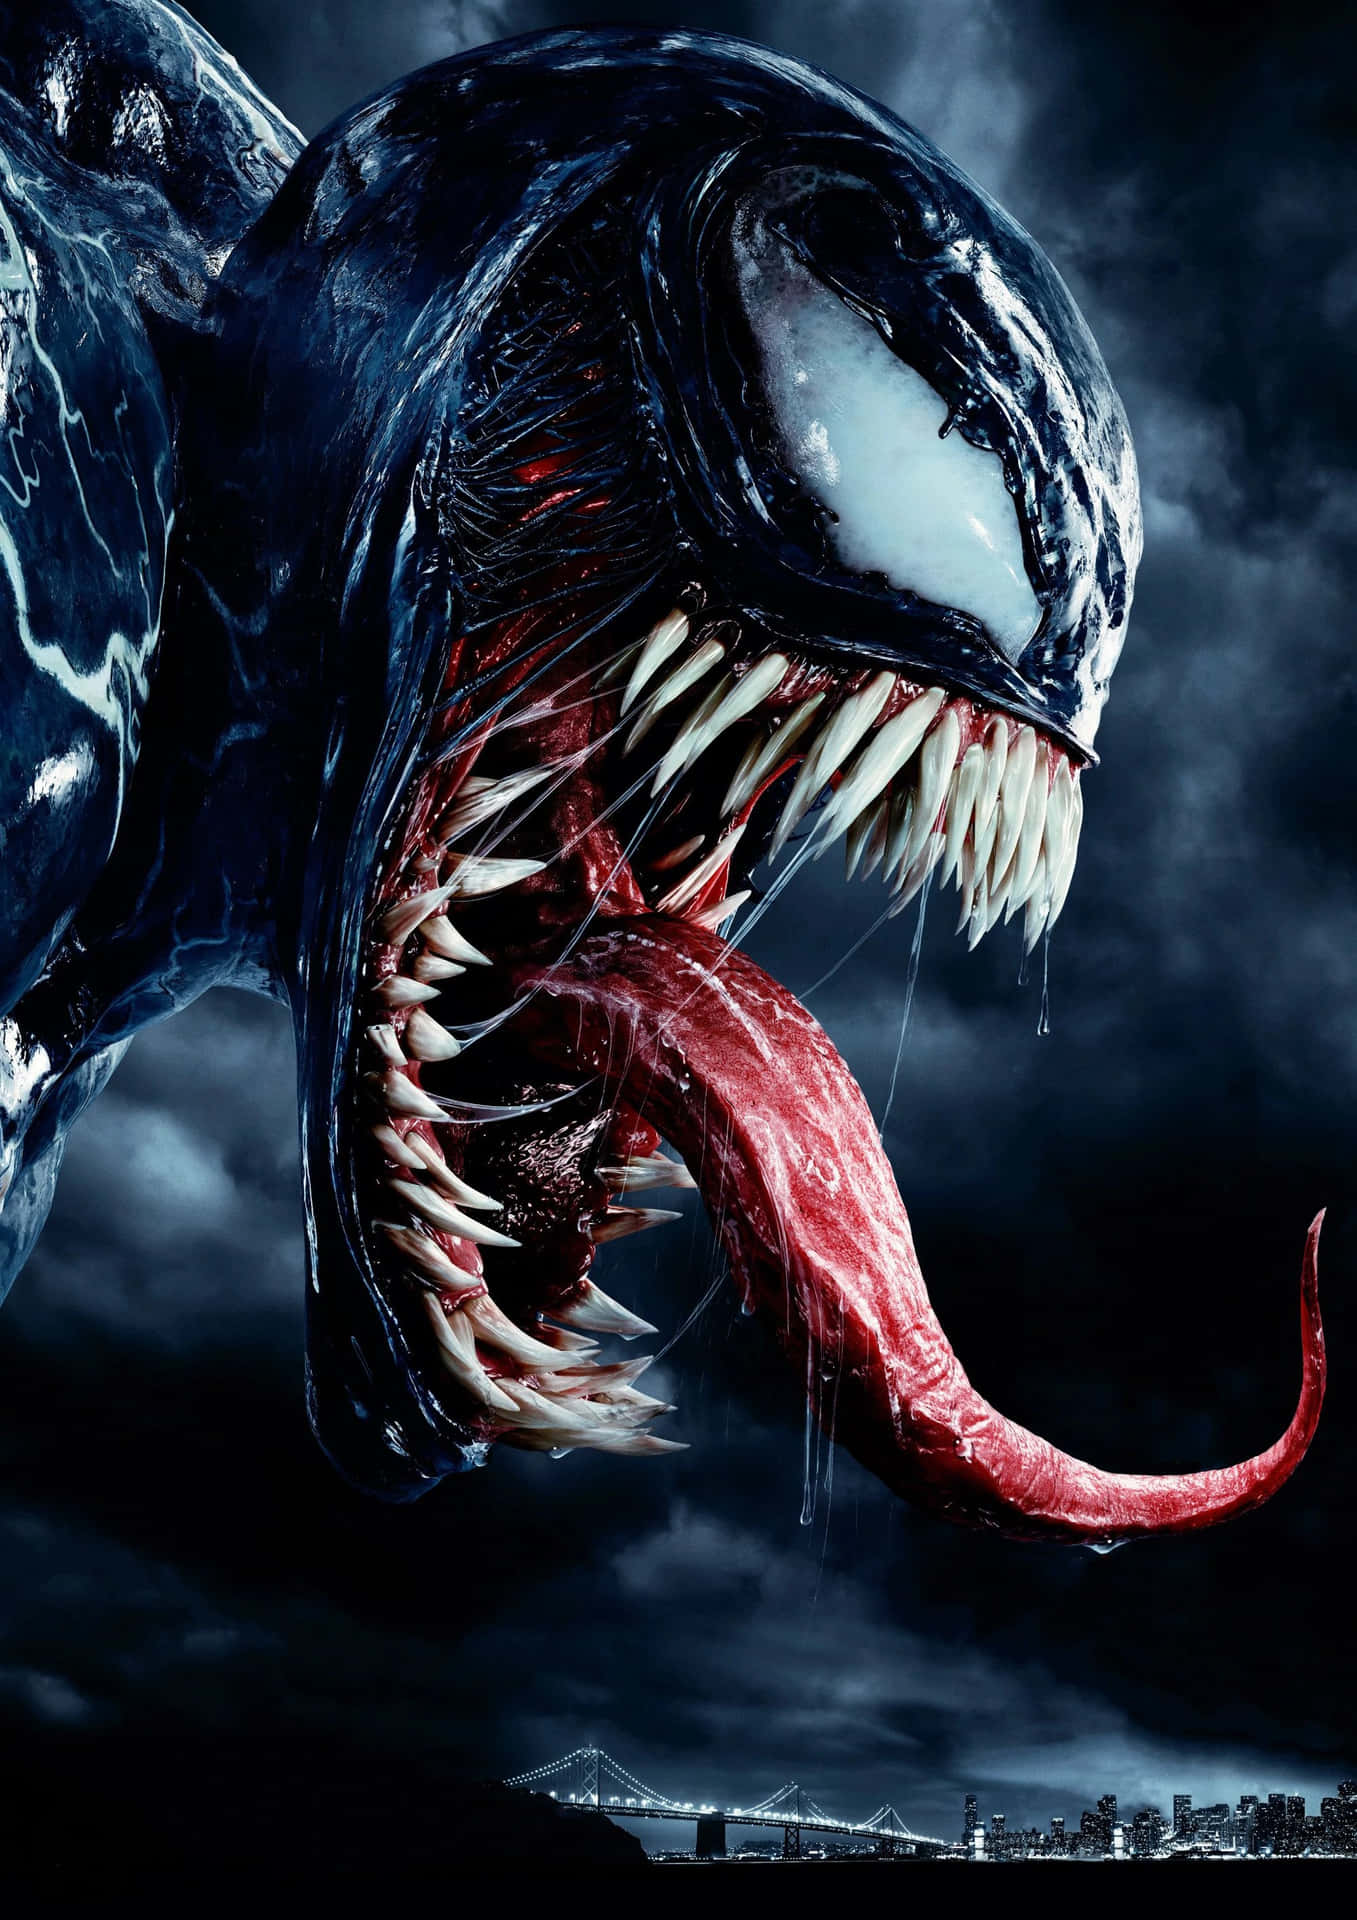 Watch out, Venom is here!